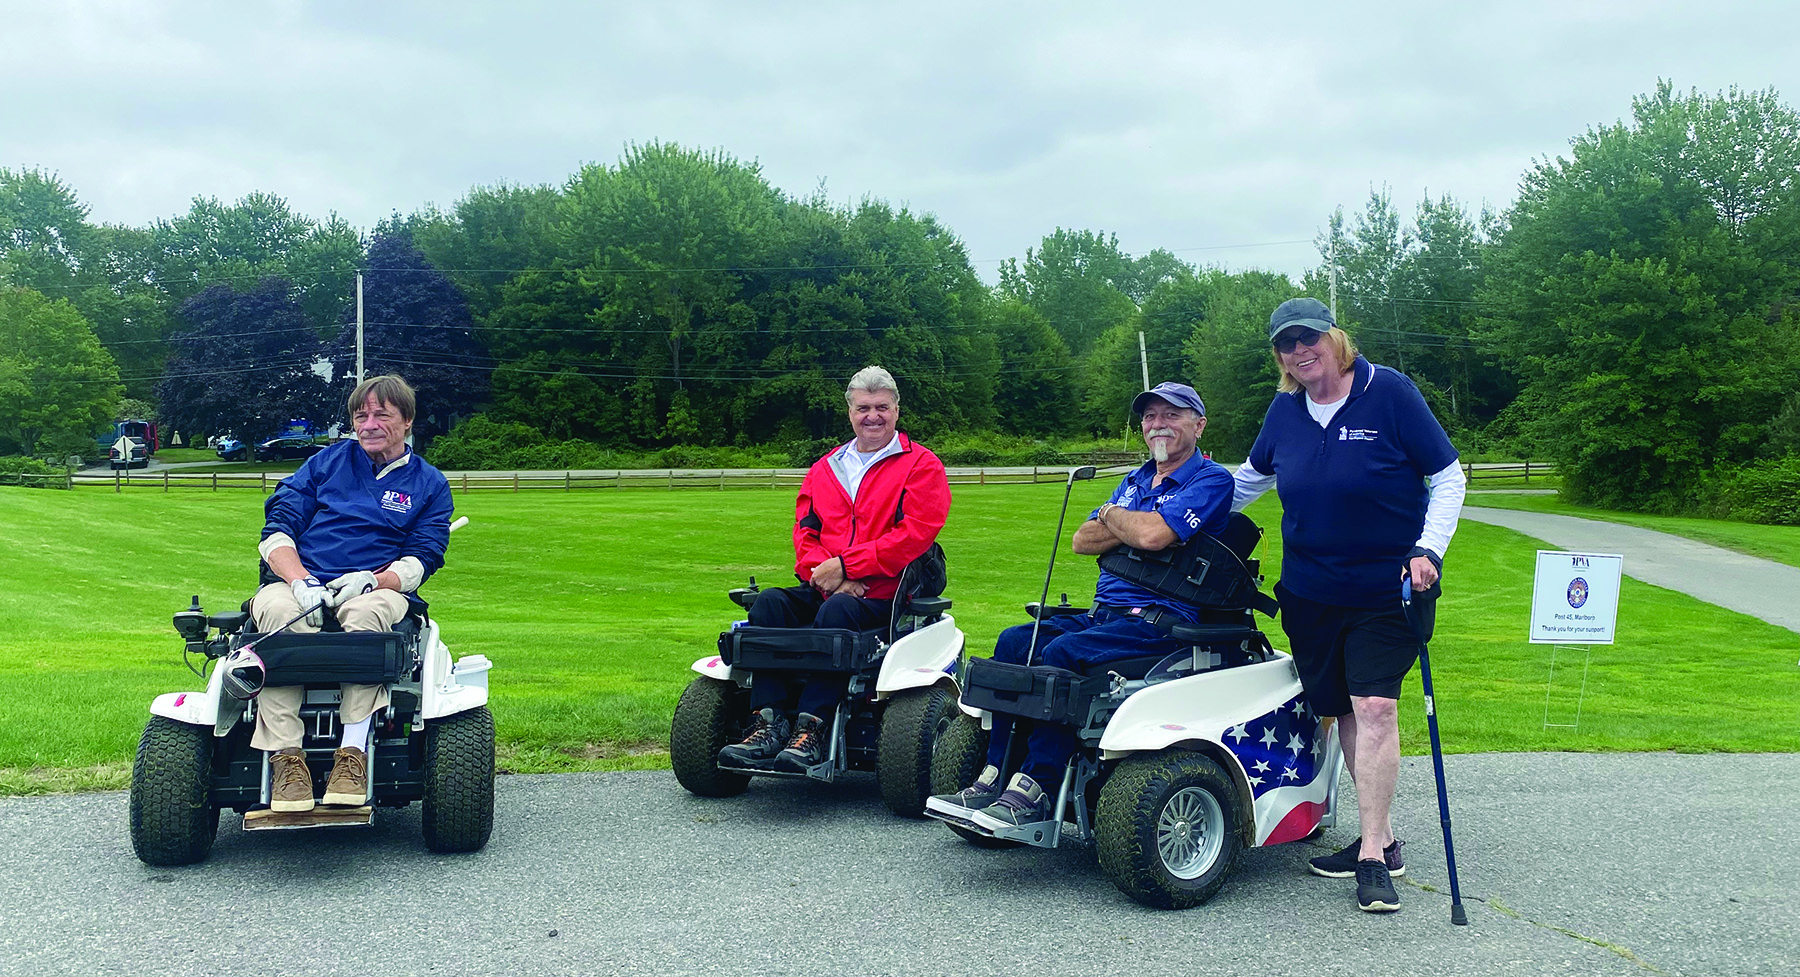 3 Adaptive golf carts for people who use wheelchairs.